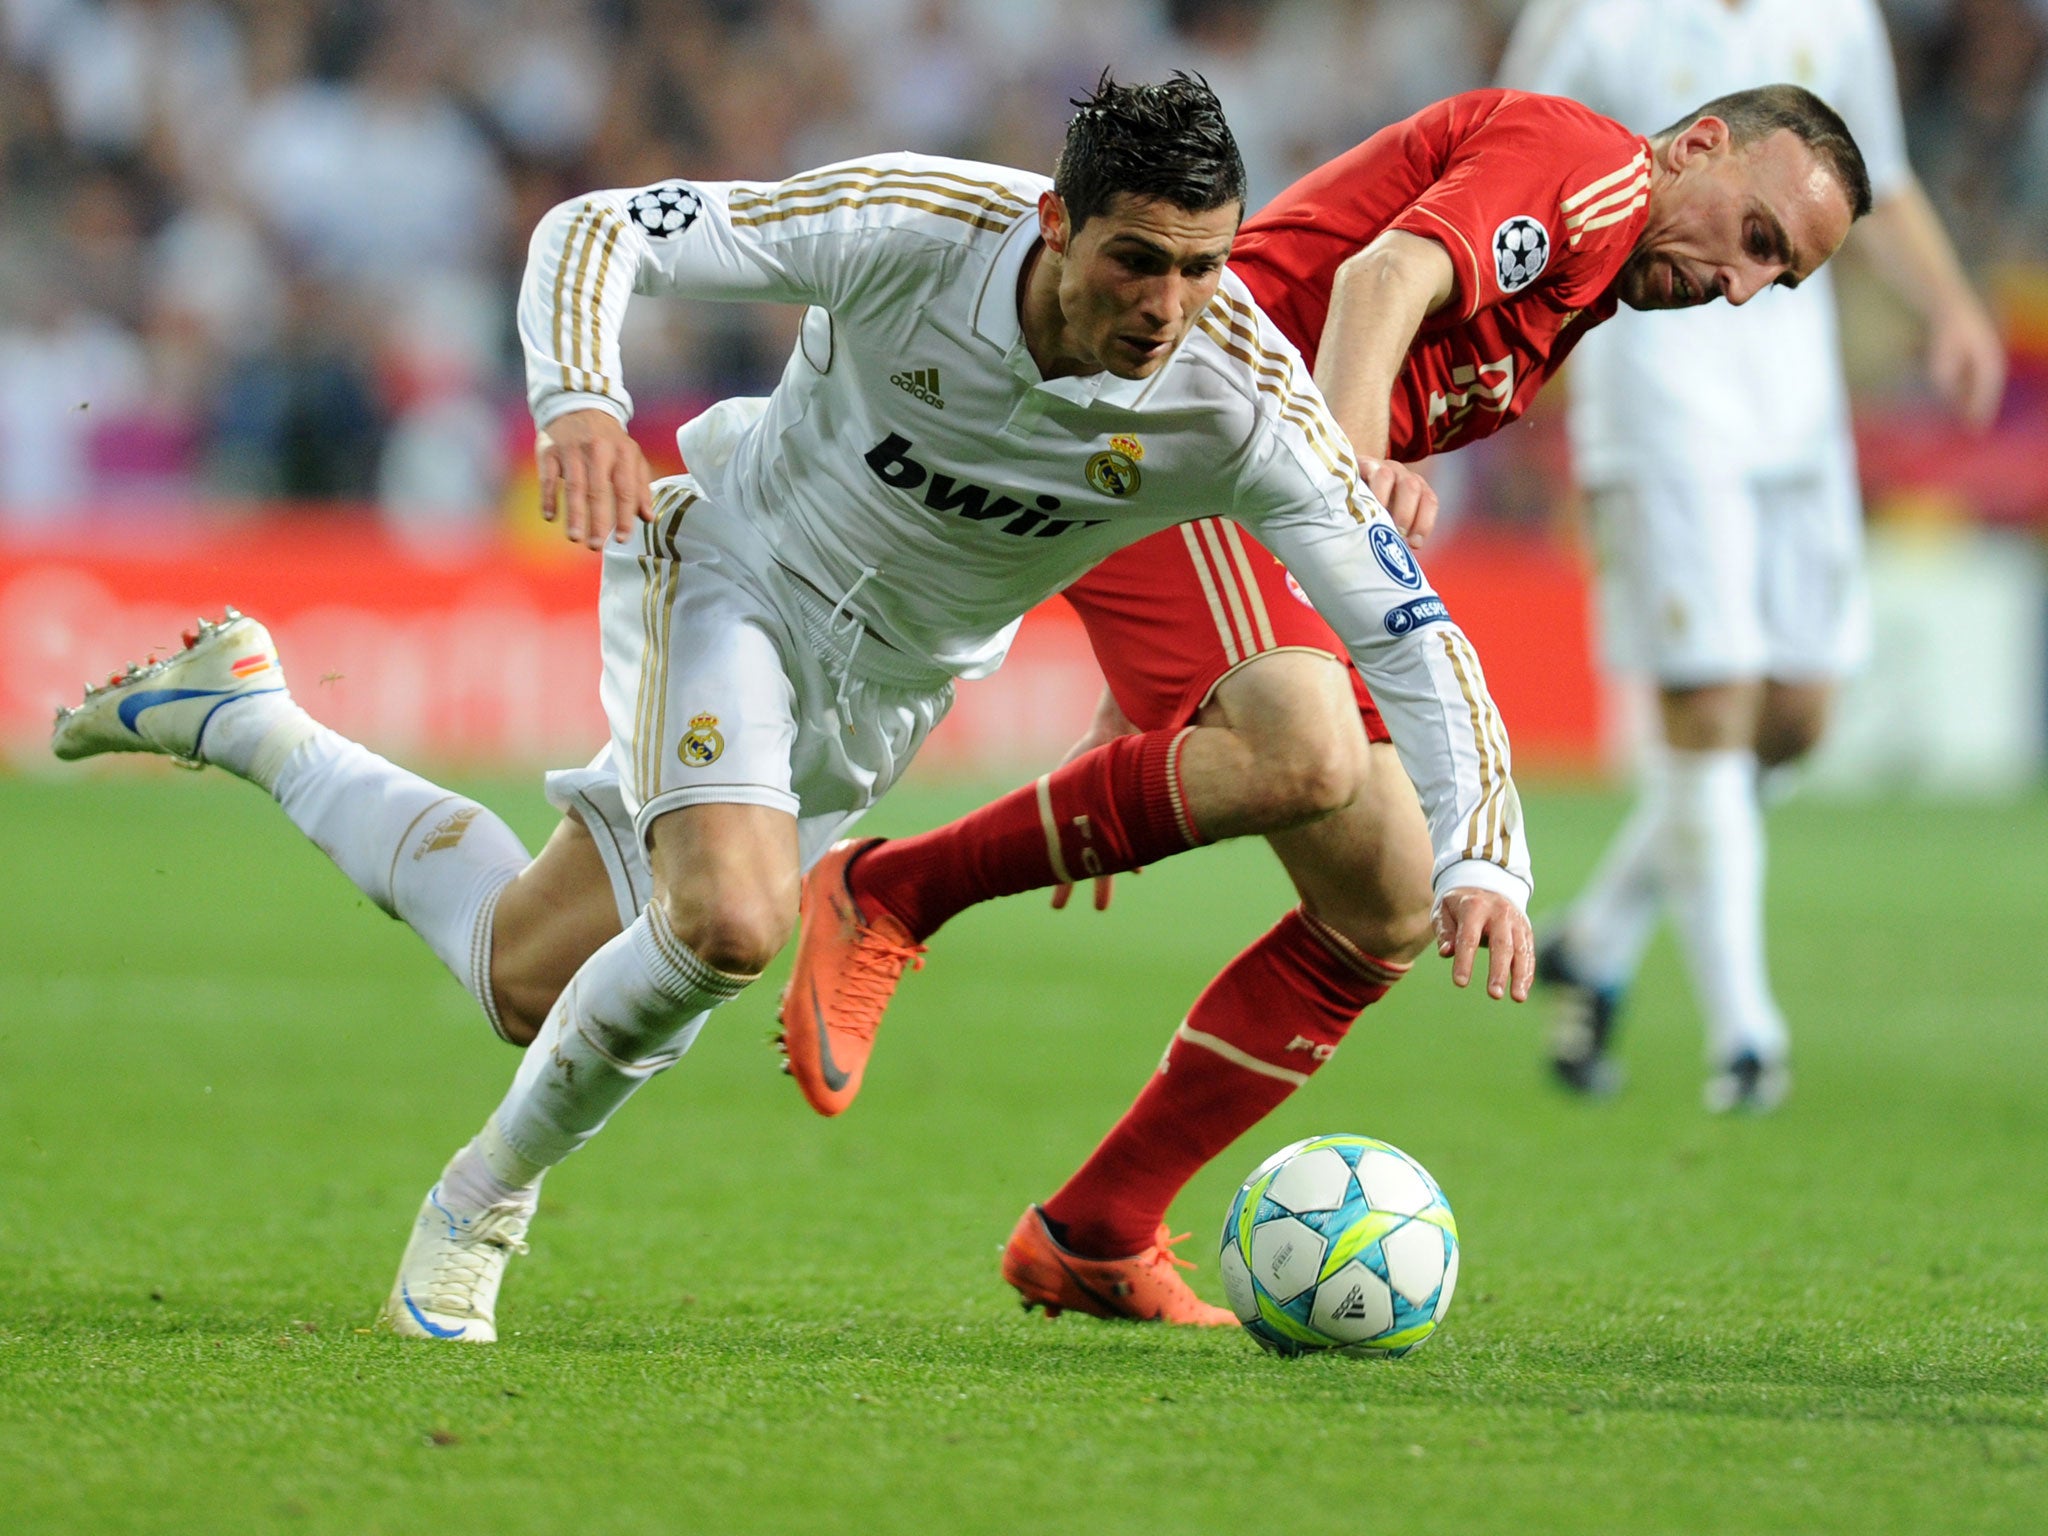 Cristiano Ronaldo and Franck Ribery jostle for the ball during Real Madrid's match against Bayern Munich